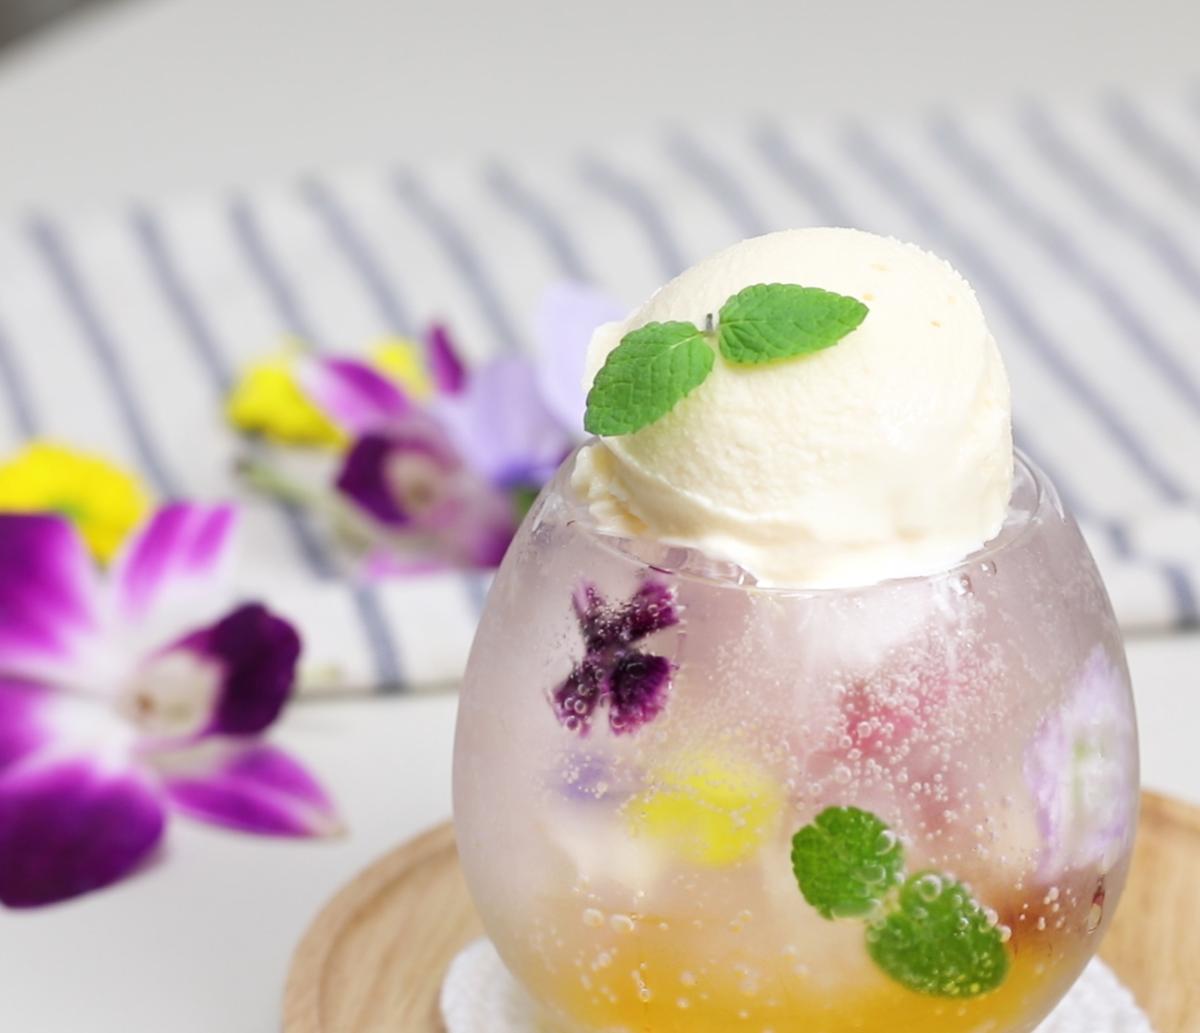 Yuja gingerade float with edible flower ice cubes. (NTD)